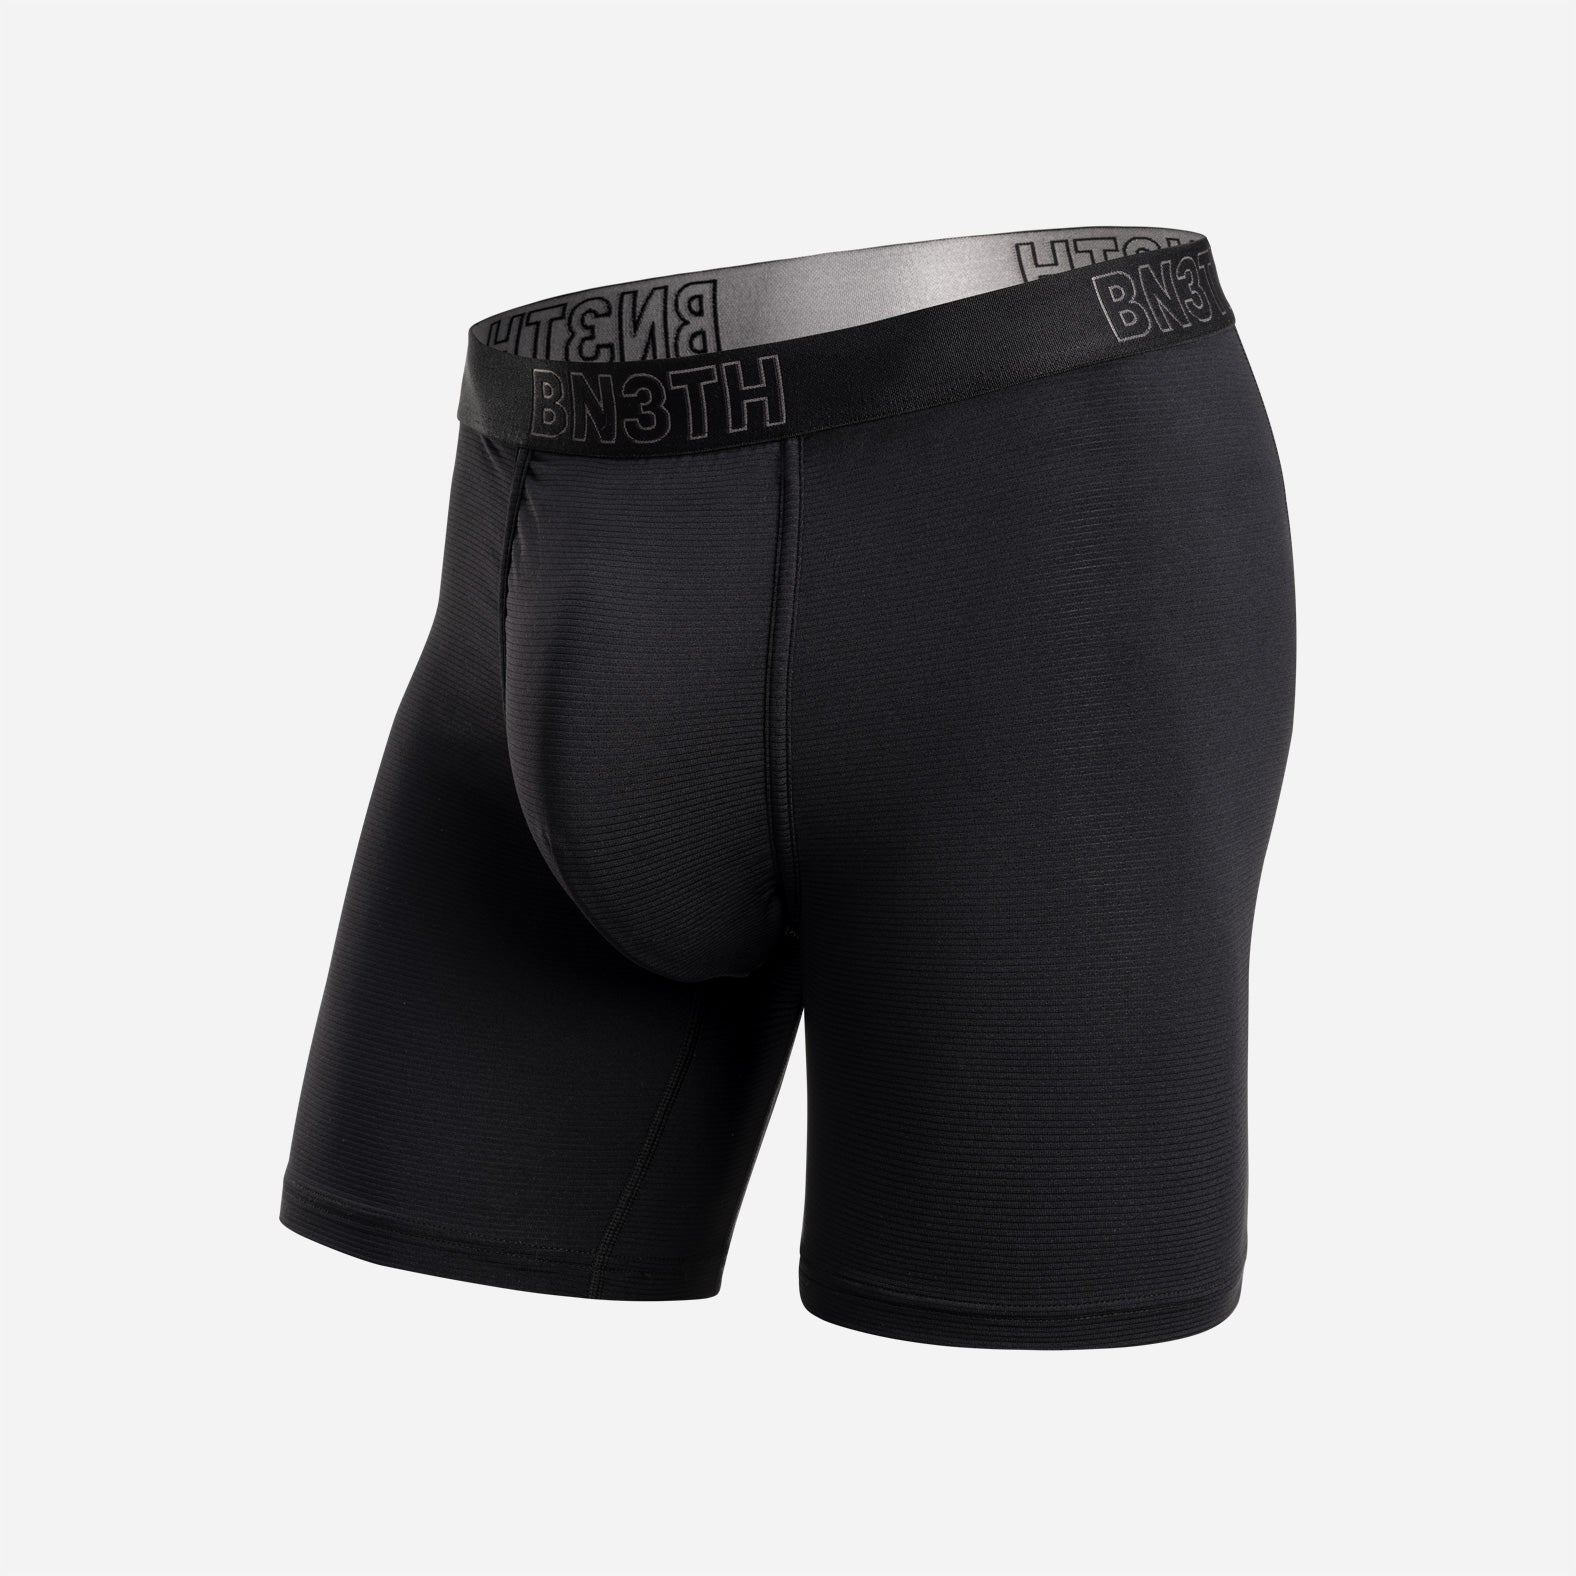 Best Breathable Boxers for Cycling [Top 3 Men's Underwear in 2023]